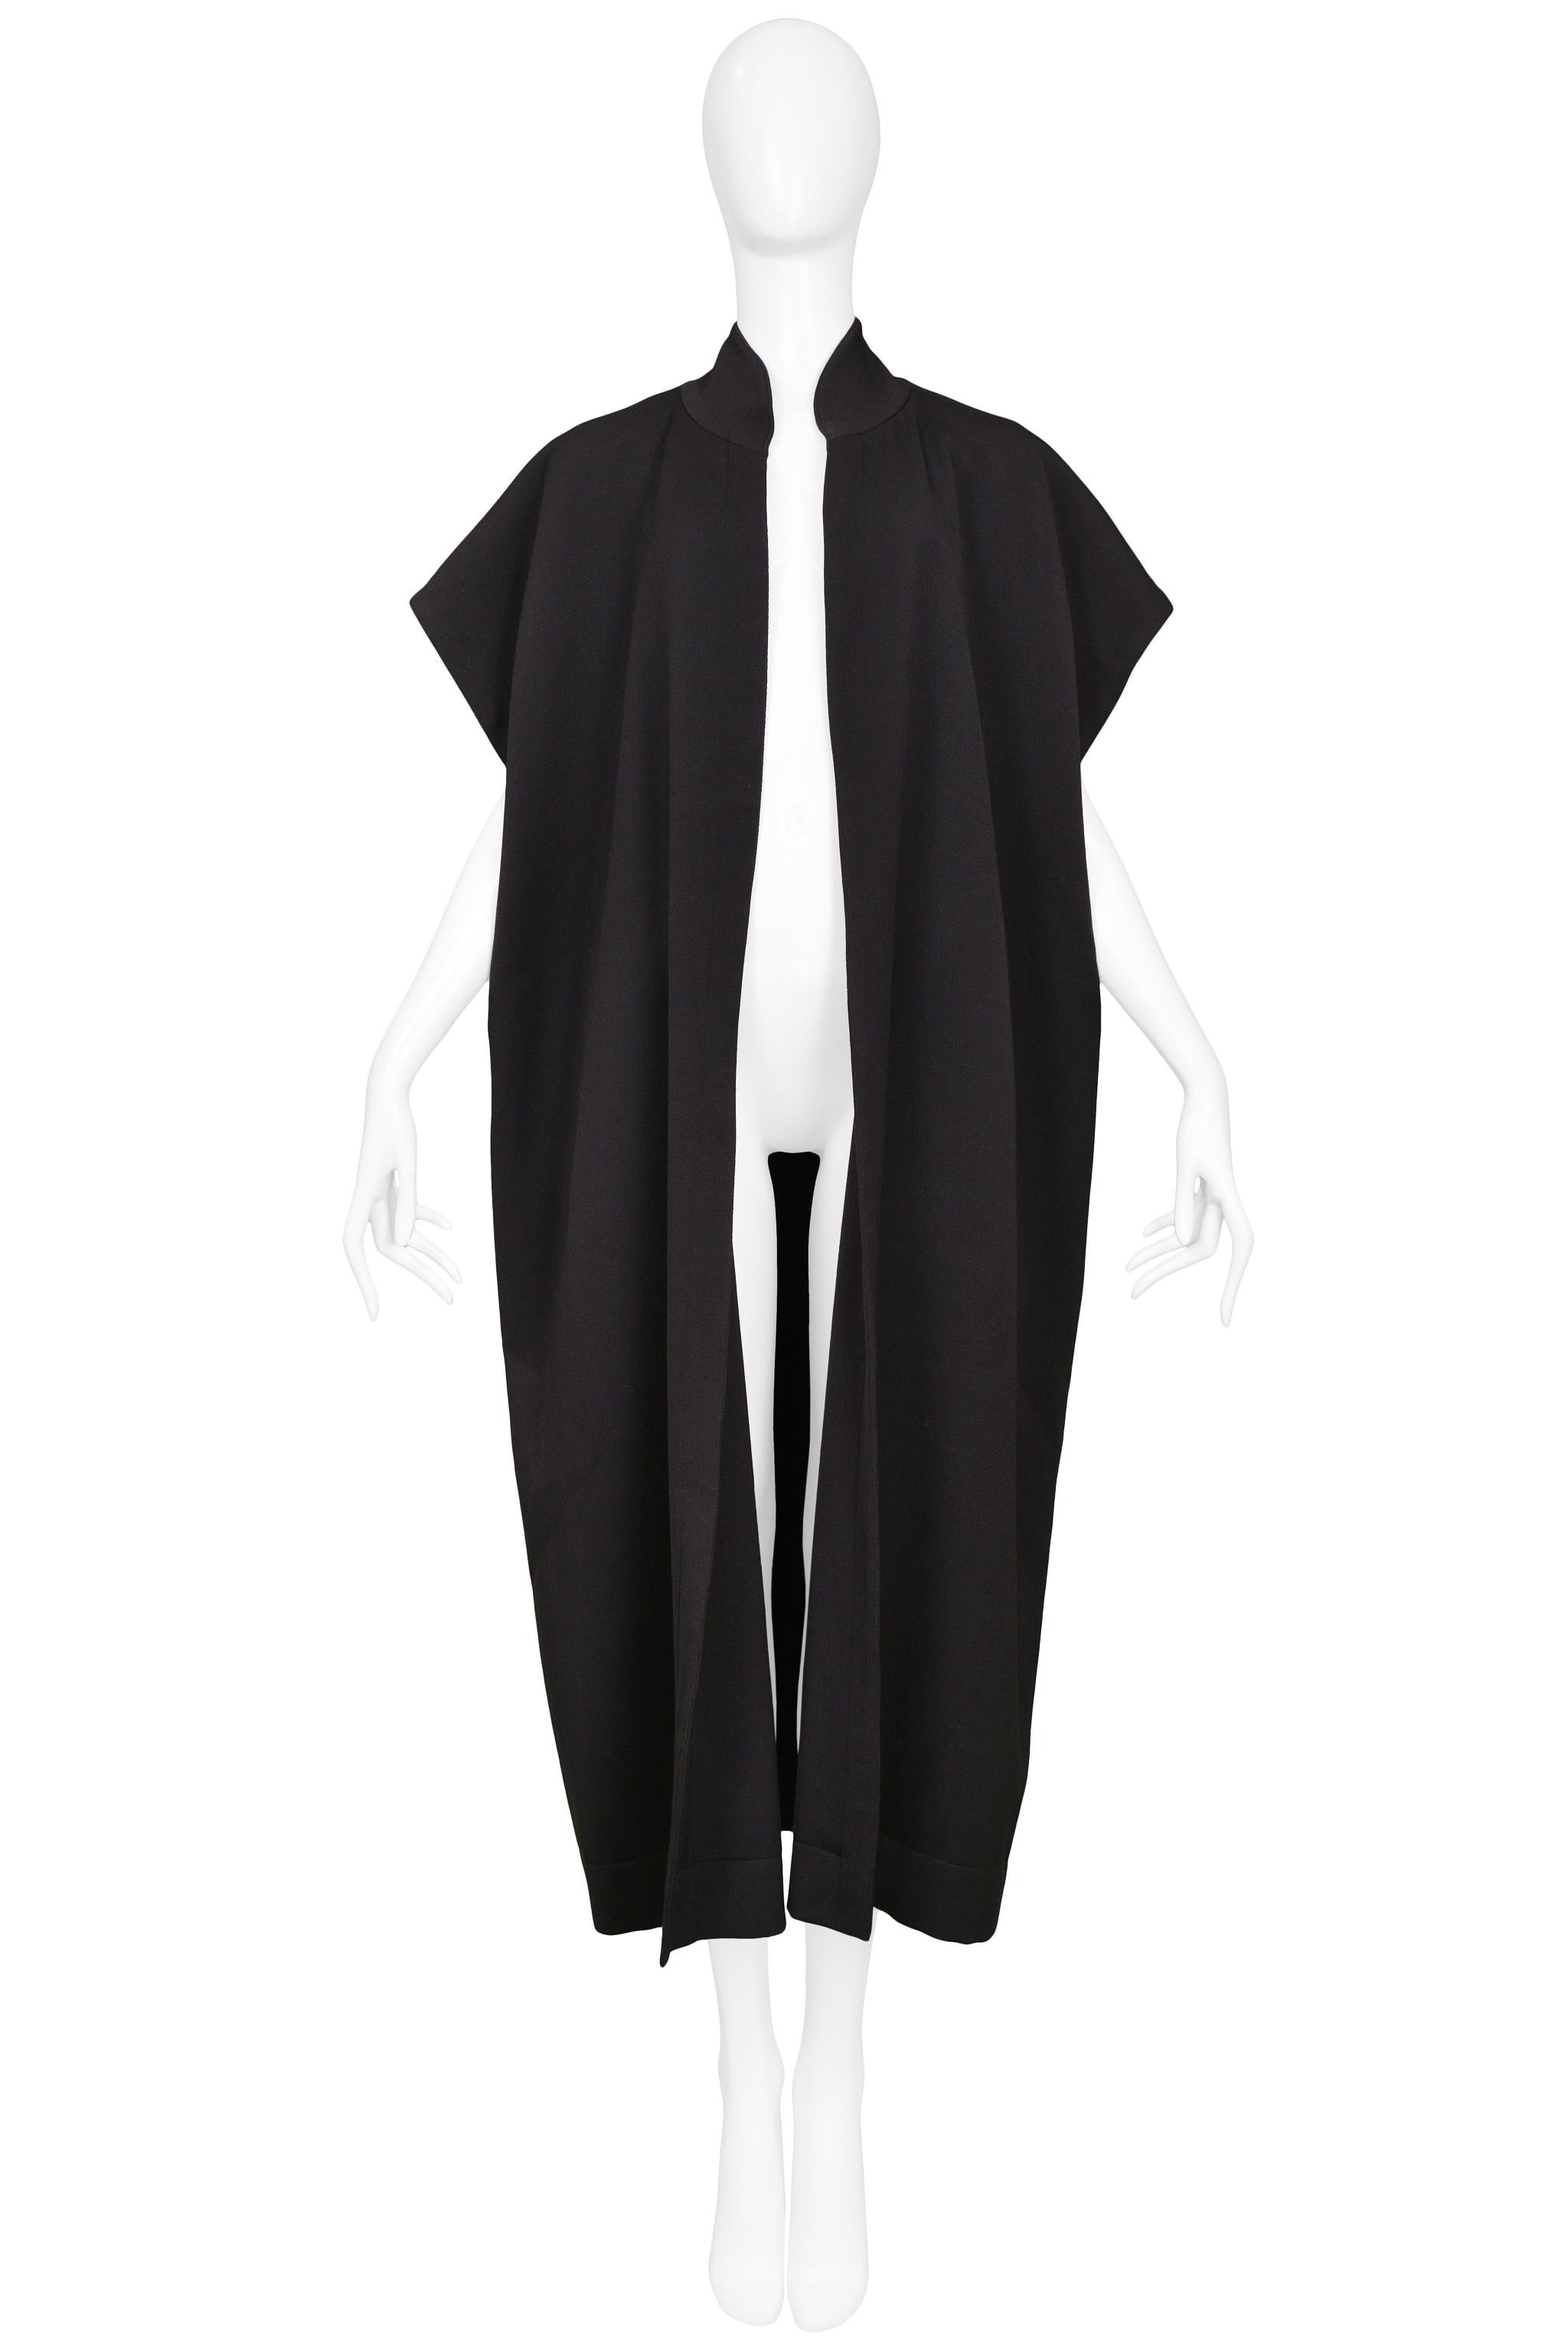 Alaia Black Hooded Cape 1980s In Excellent Condition In Los Angeles, CA